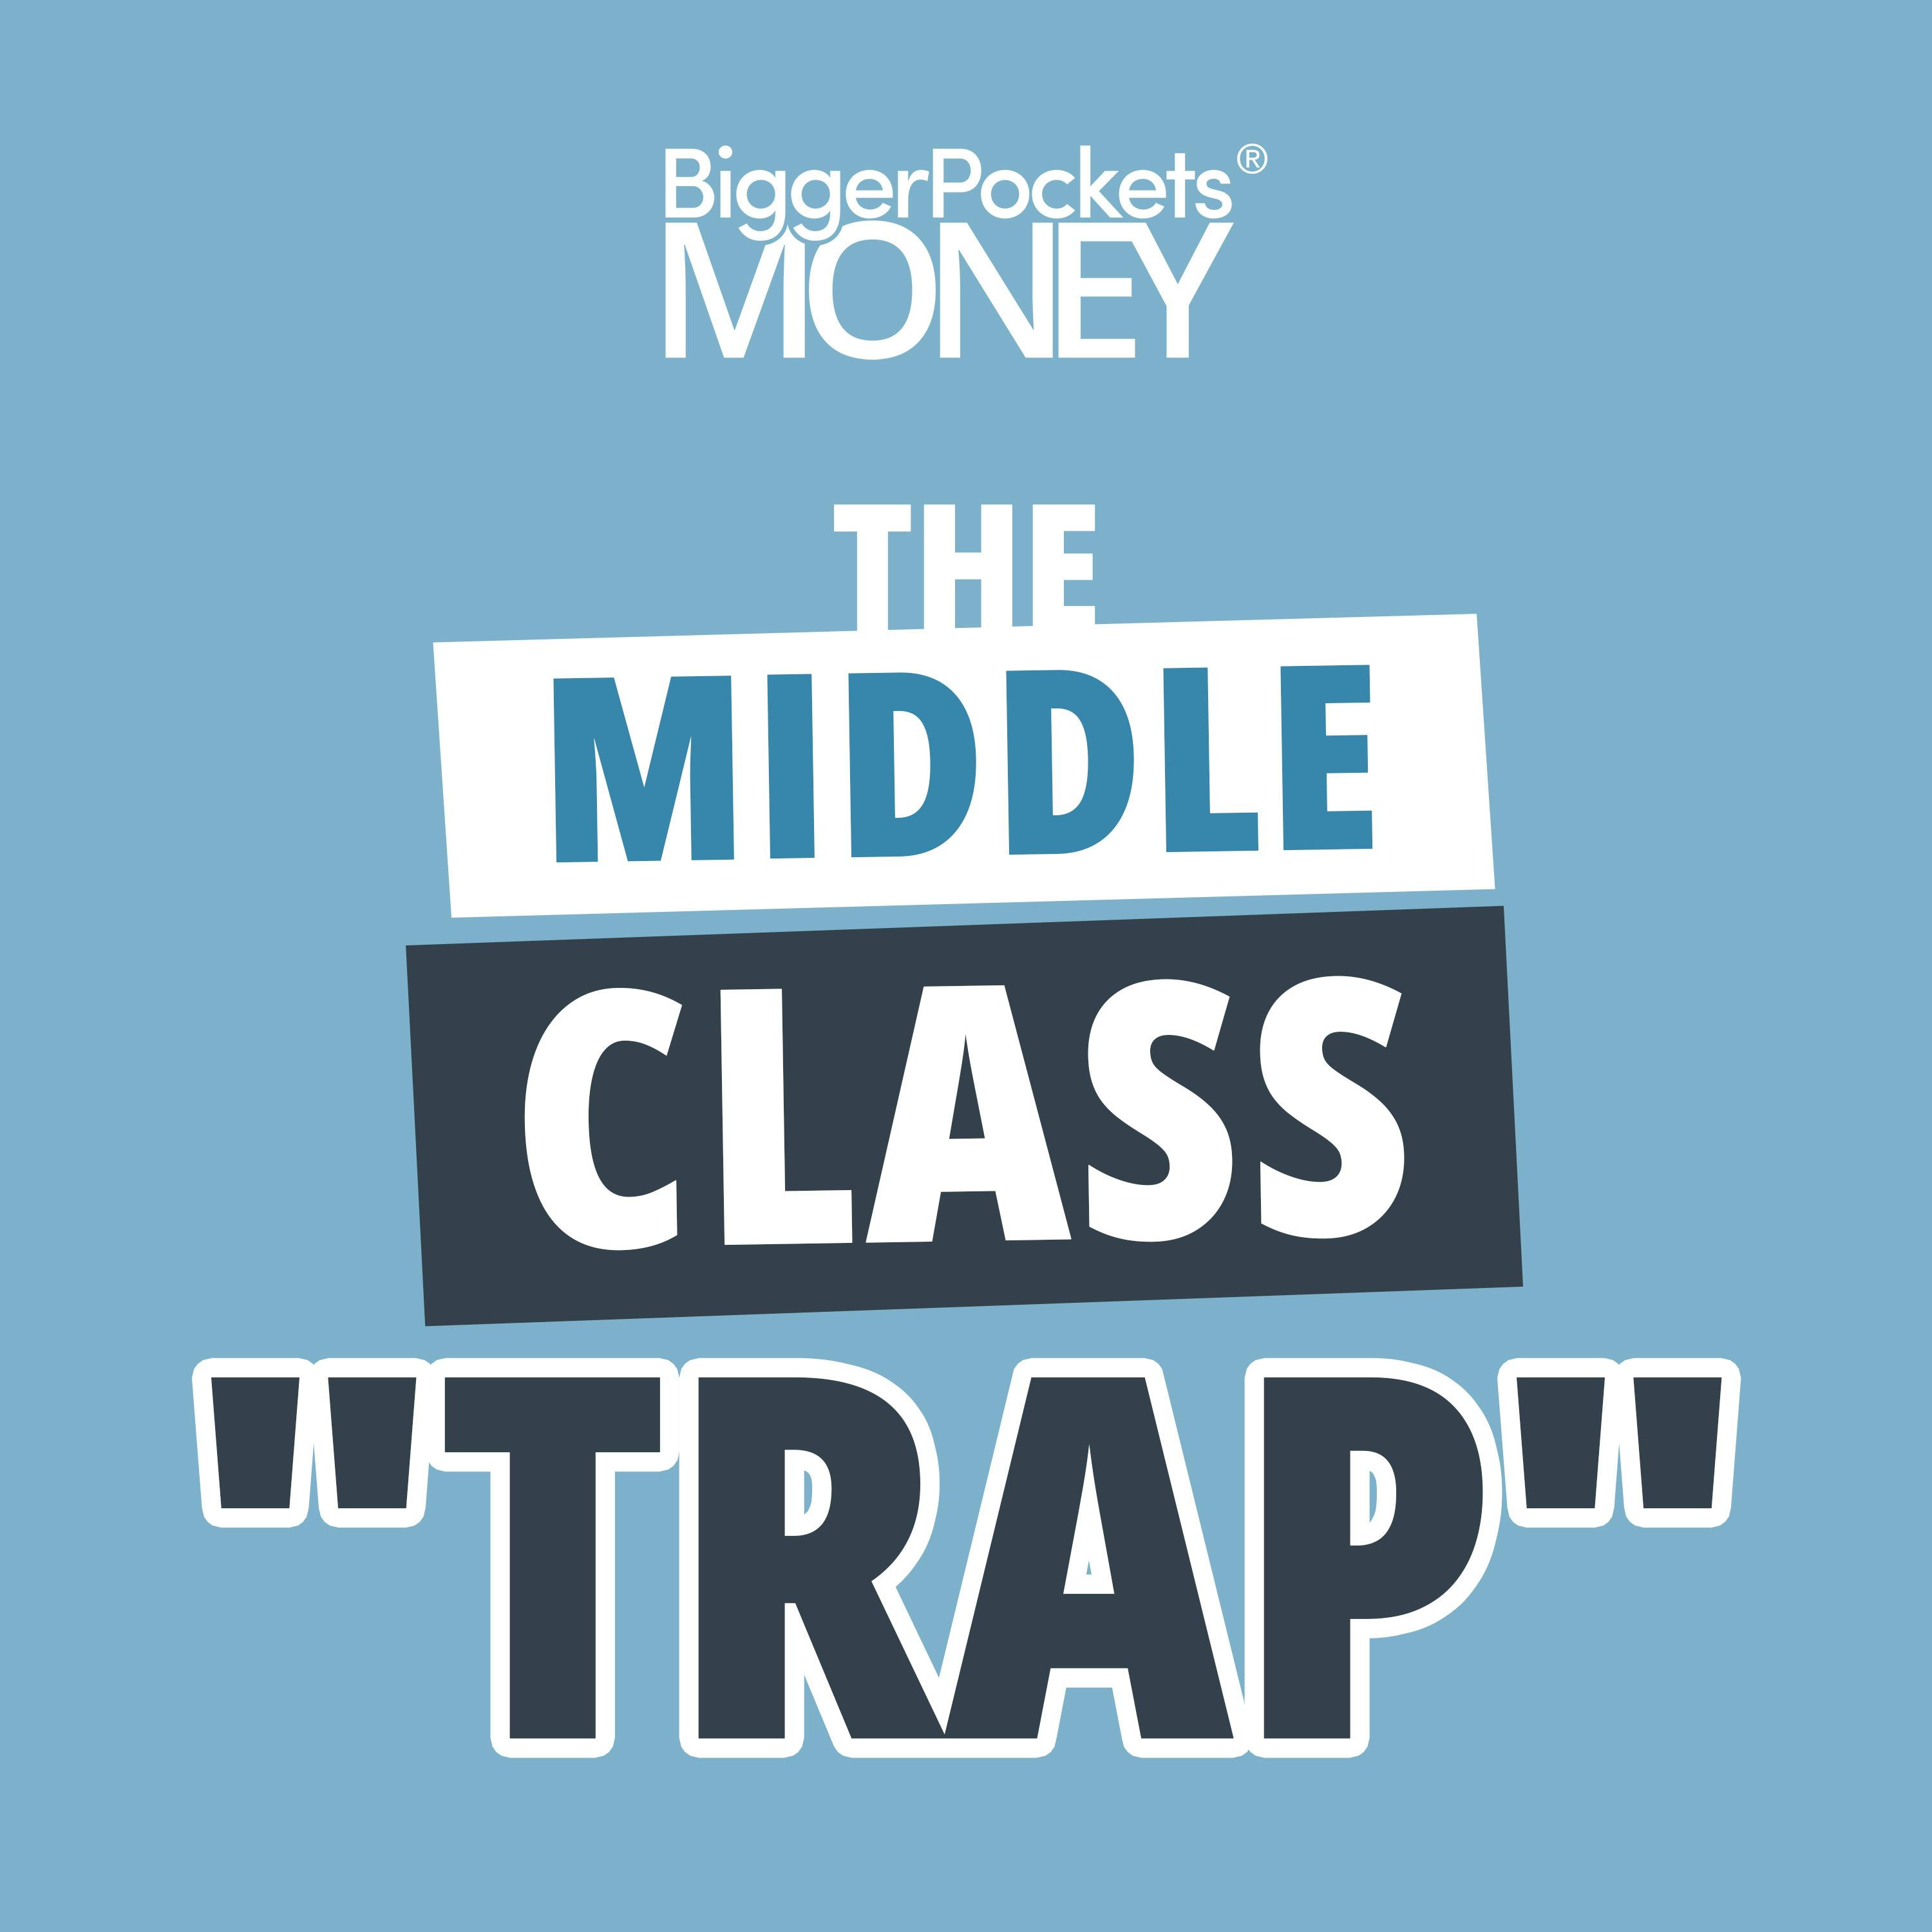 450: The “Middle Class Trap” That’s Keeping You in Debt